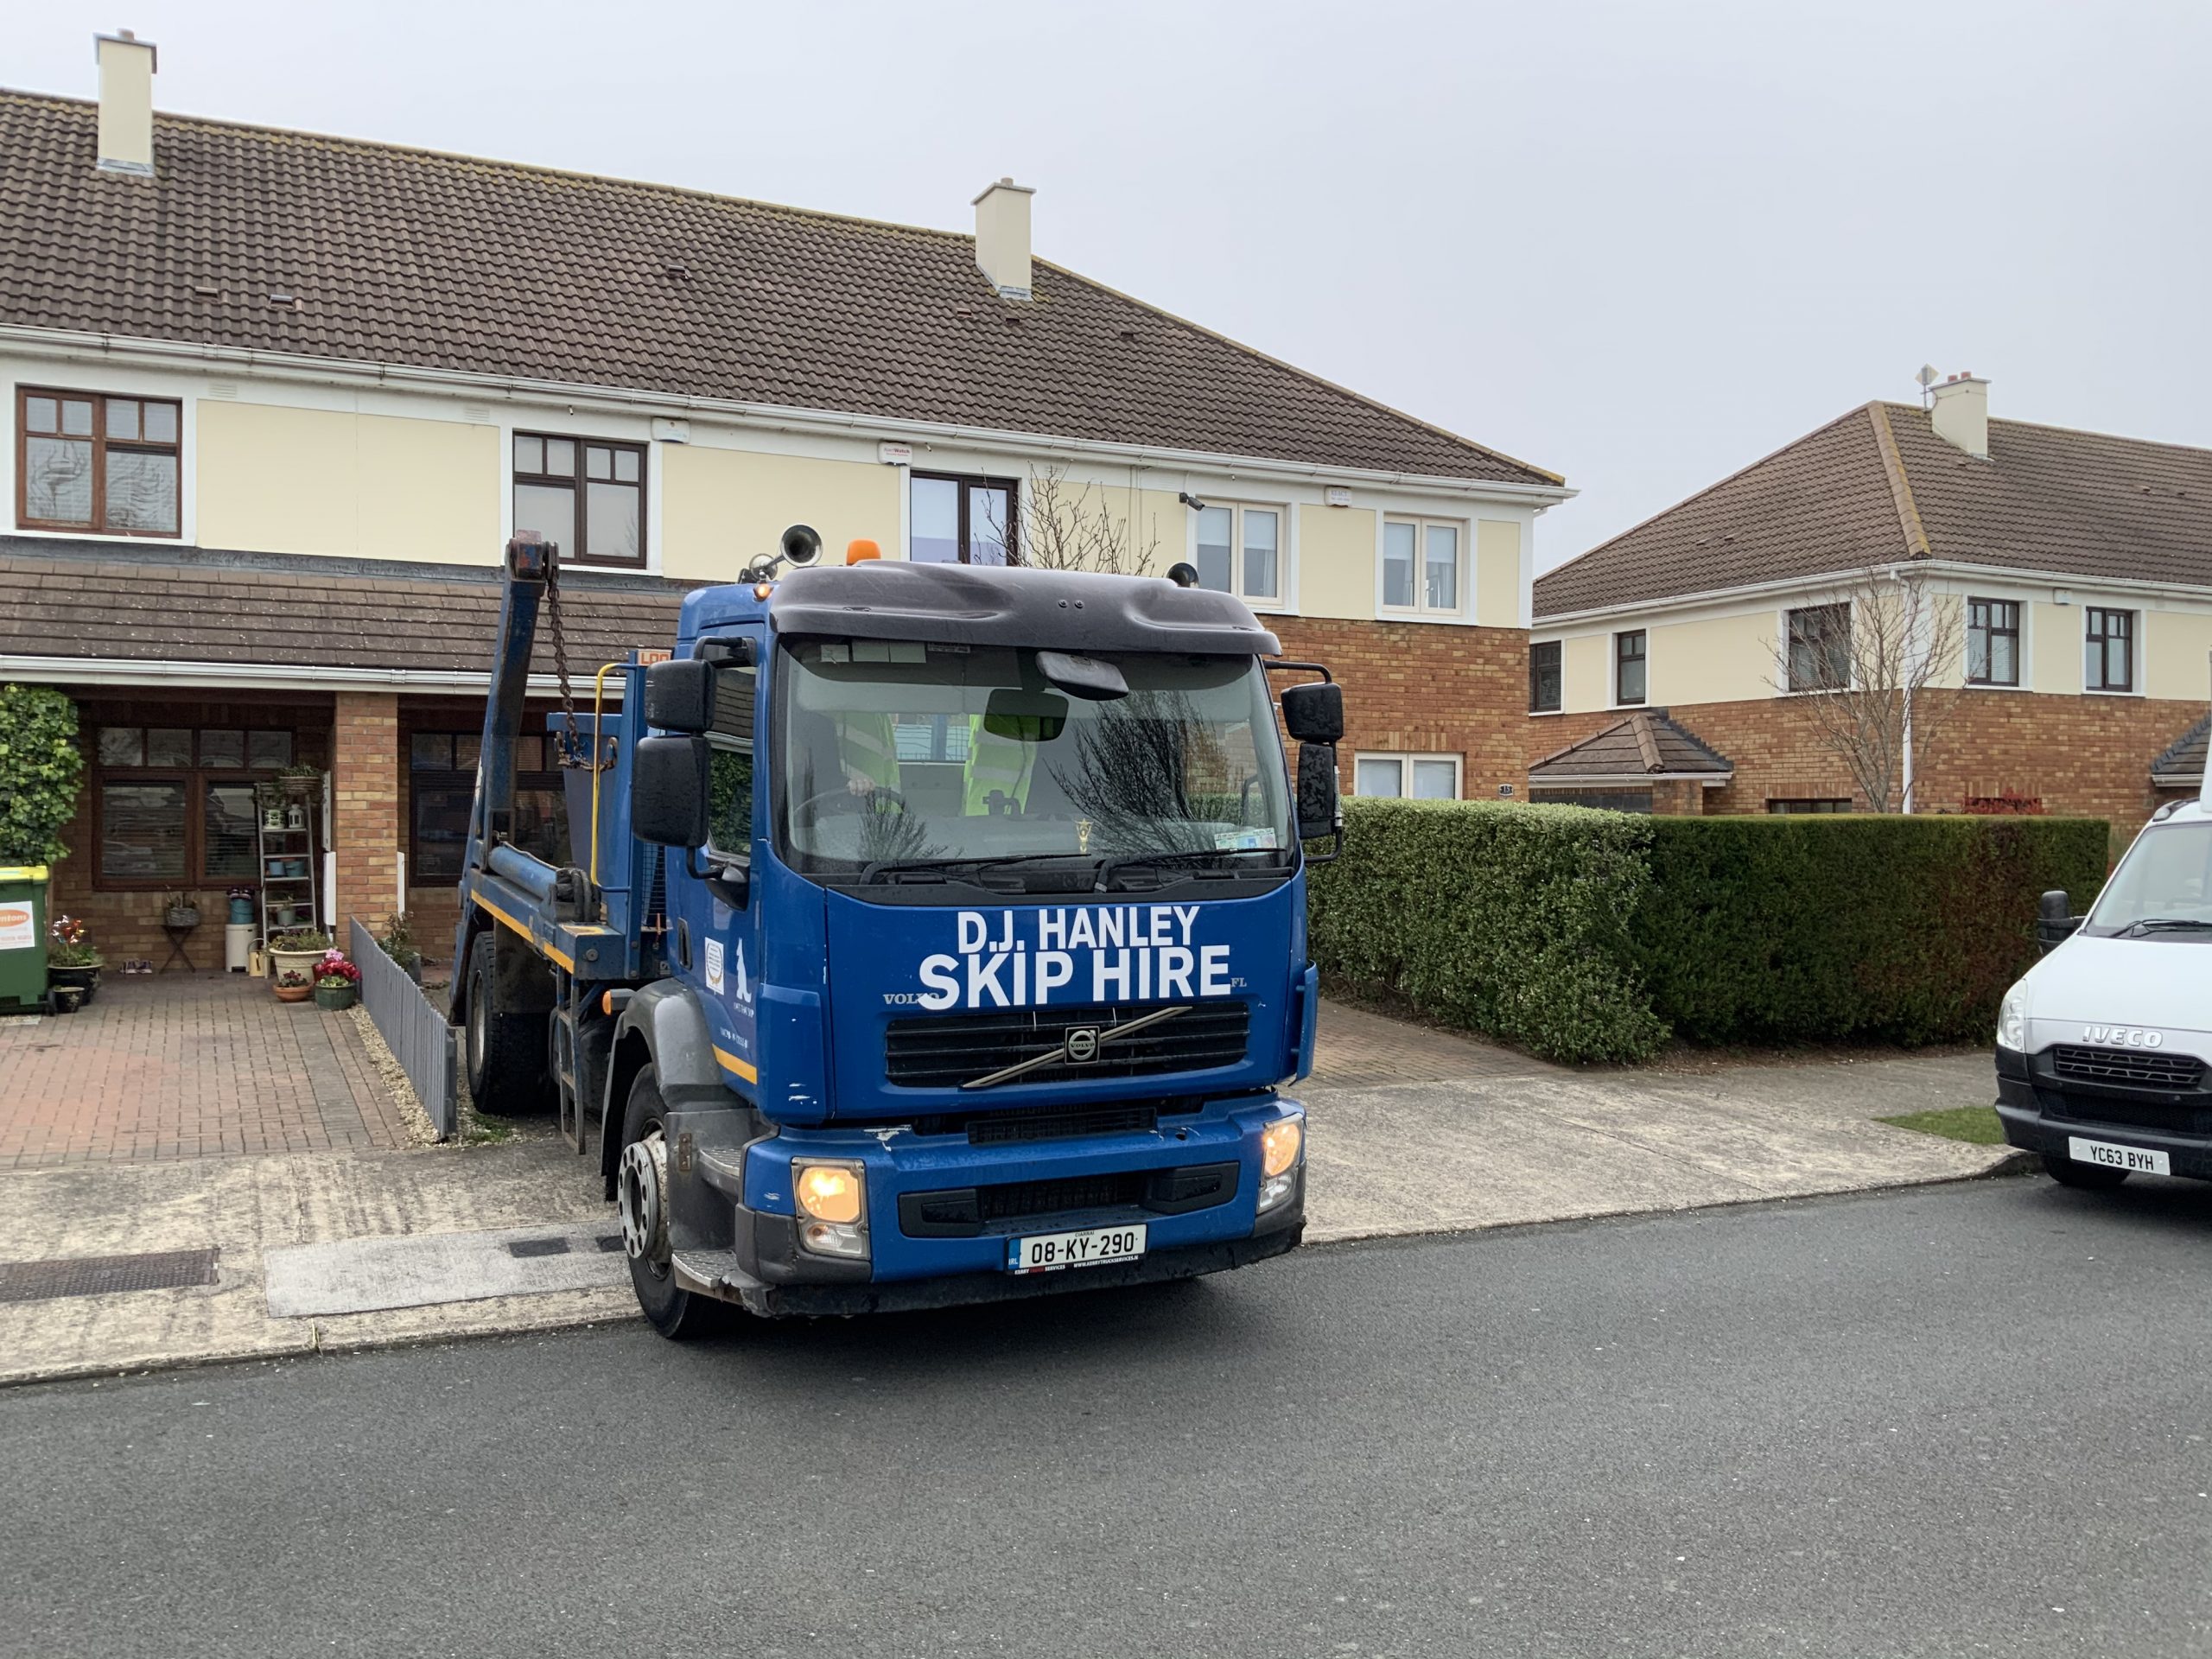 Thank you for your message. DJ Hanley's Skip Truck Skip Hire